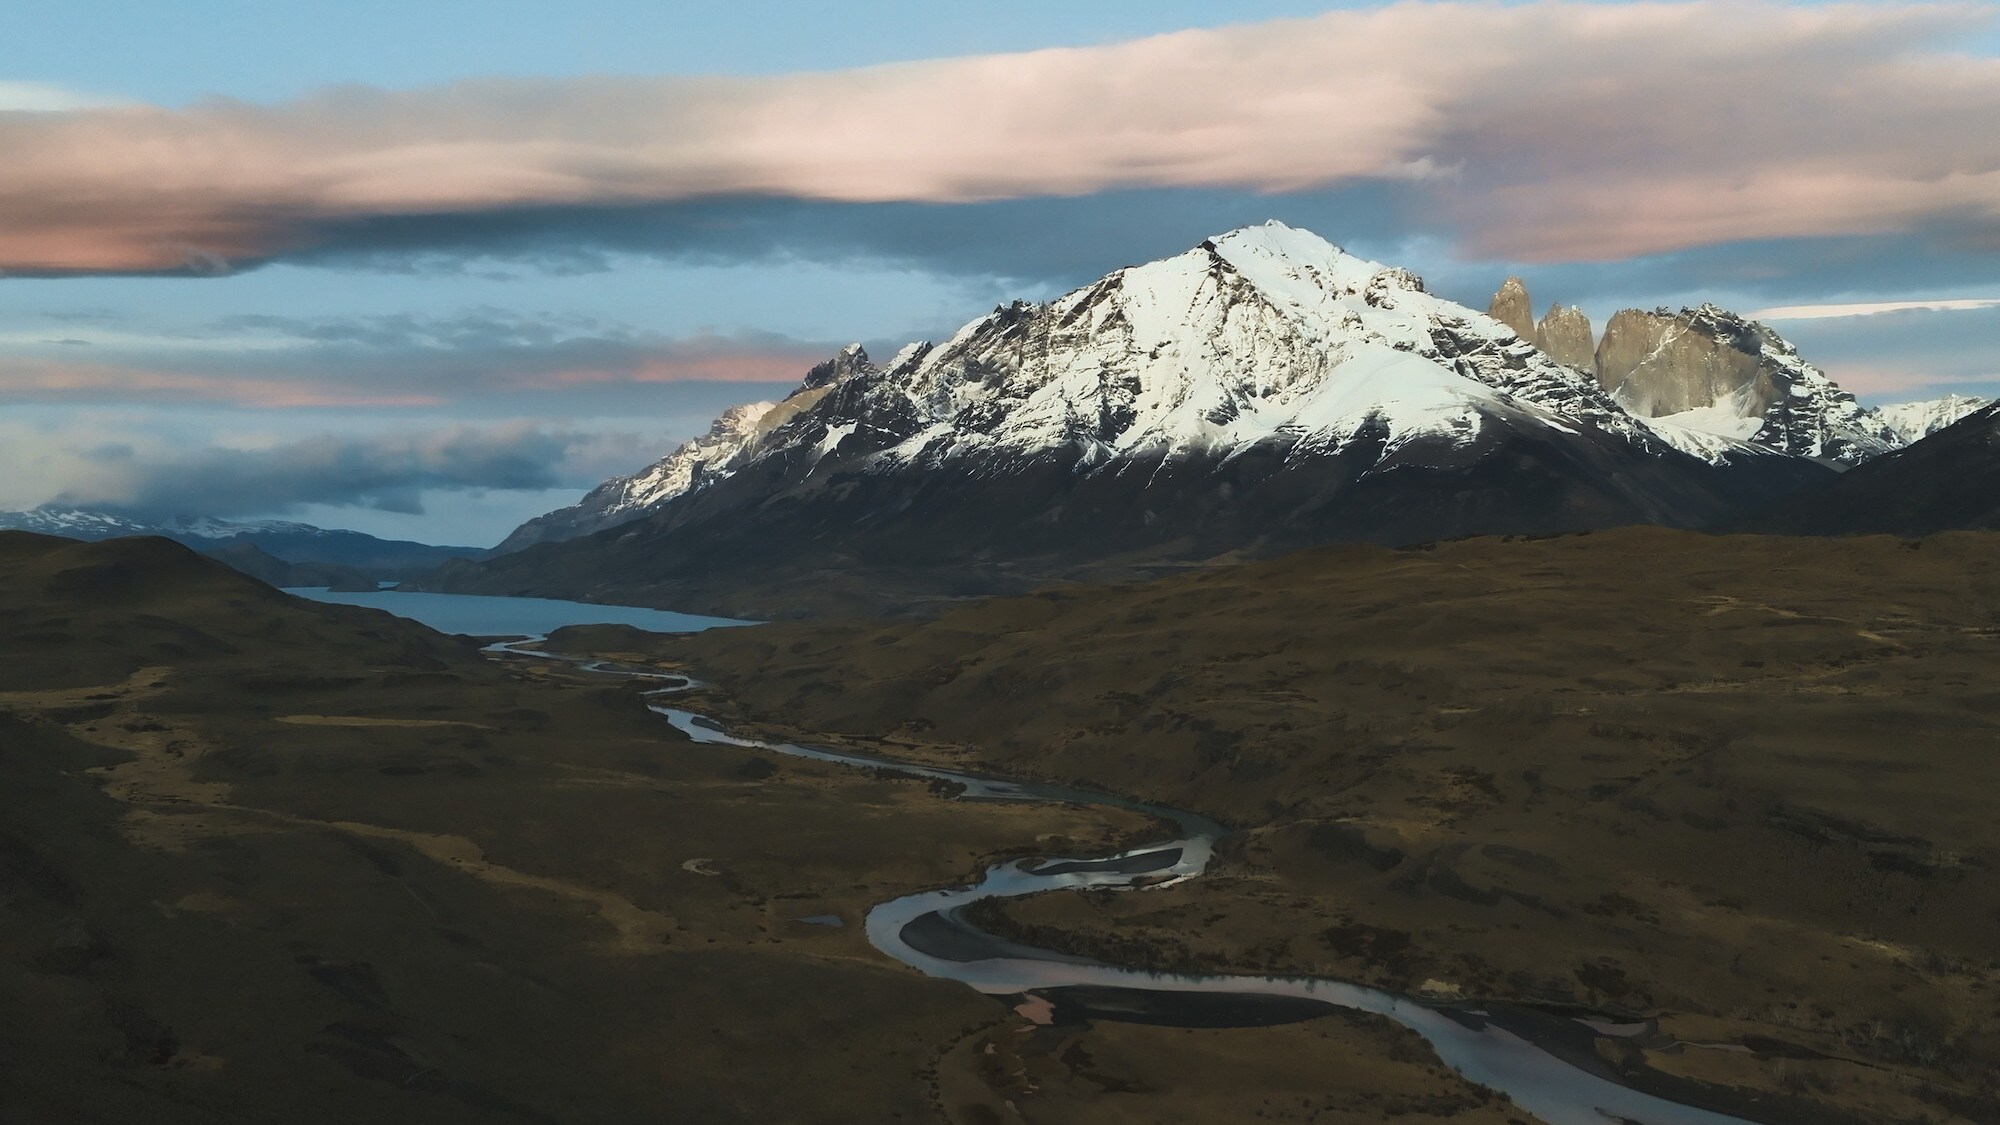 Winding river in Patagonia. (National Geographic for Disney+/Sam Stewart)